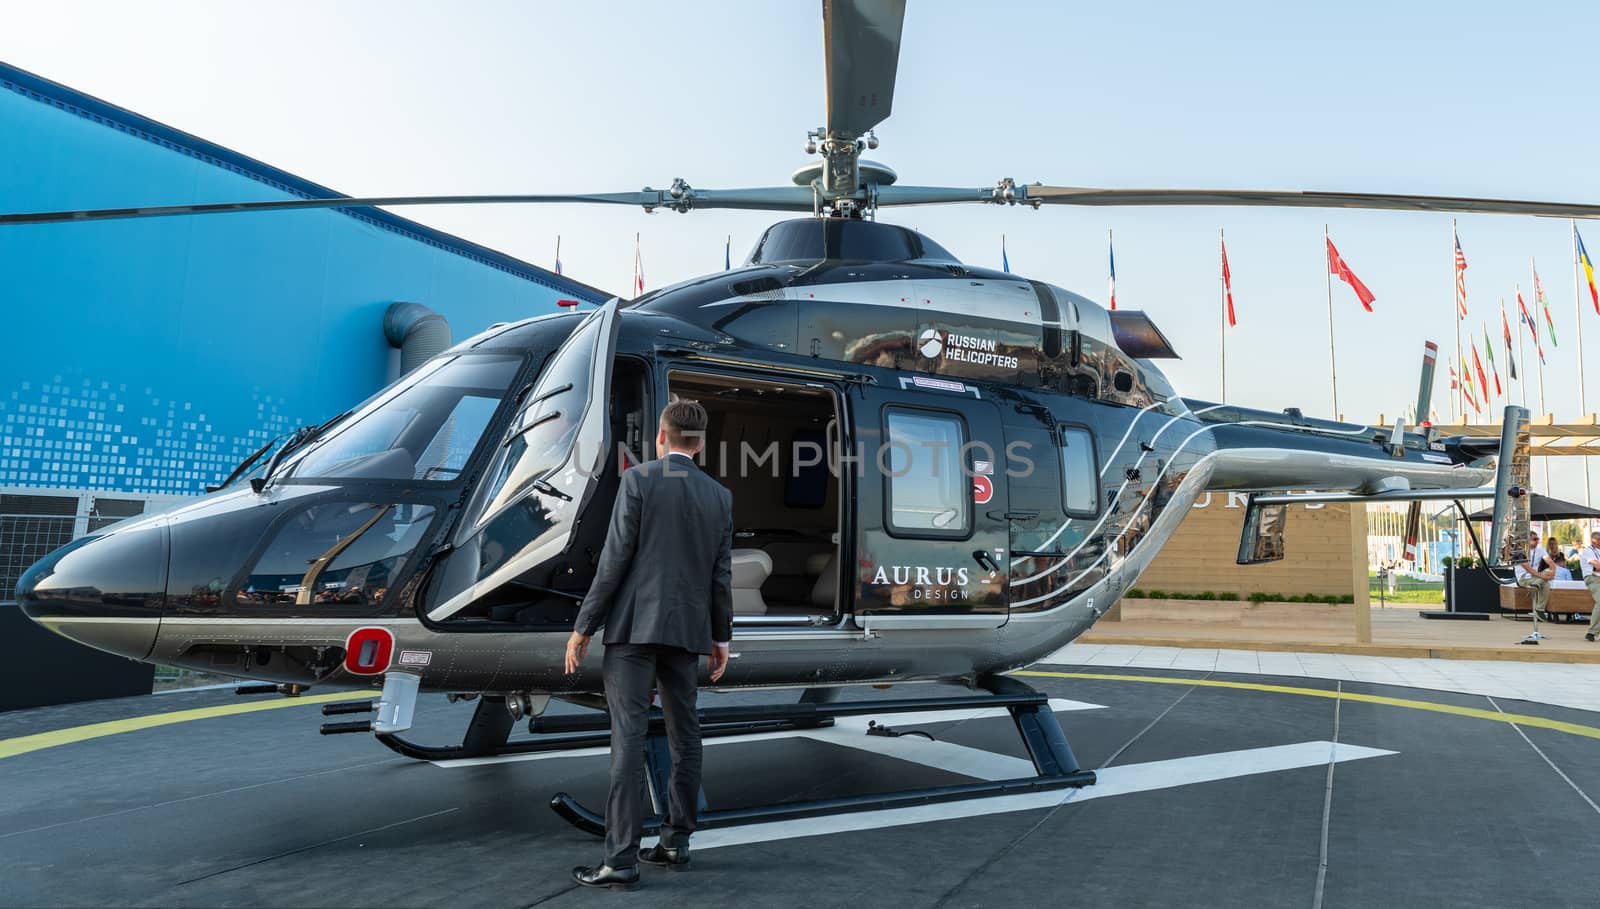 August 30, 2019 Zhukovsky, Russia. The Ansat helicopter in the Aurus design at the MAKS-2019 International aviation and space salon.